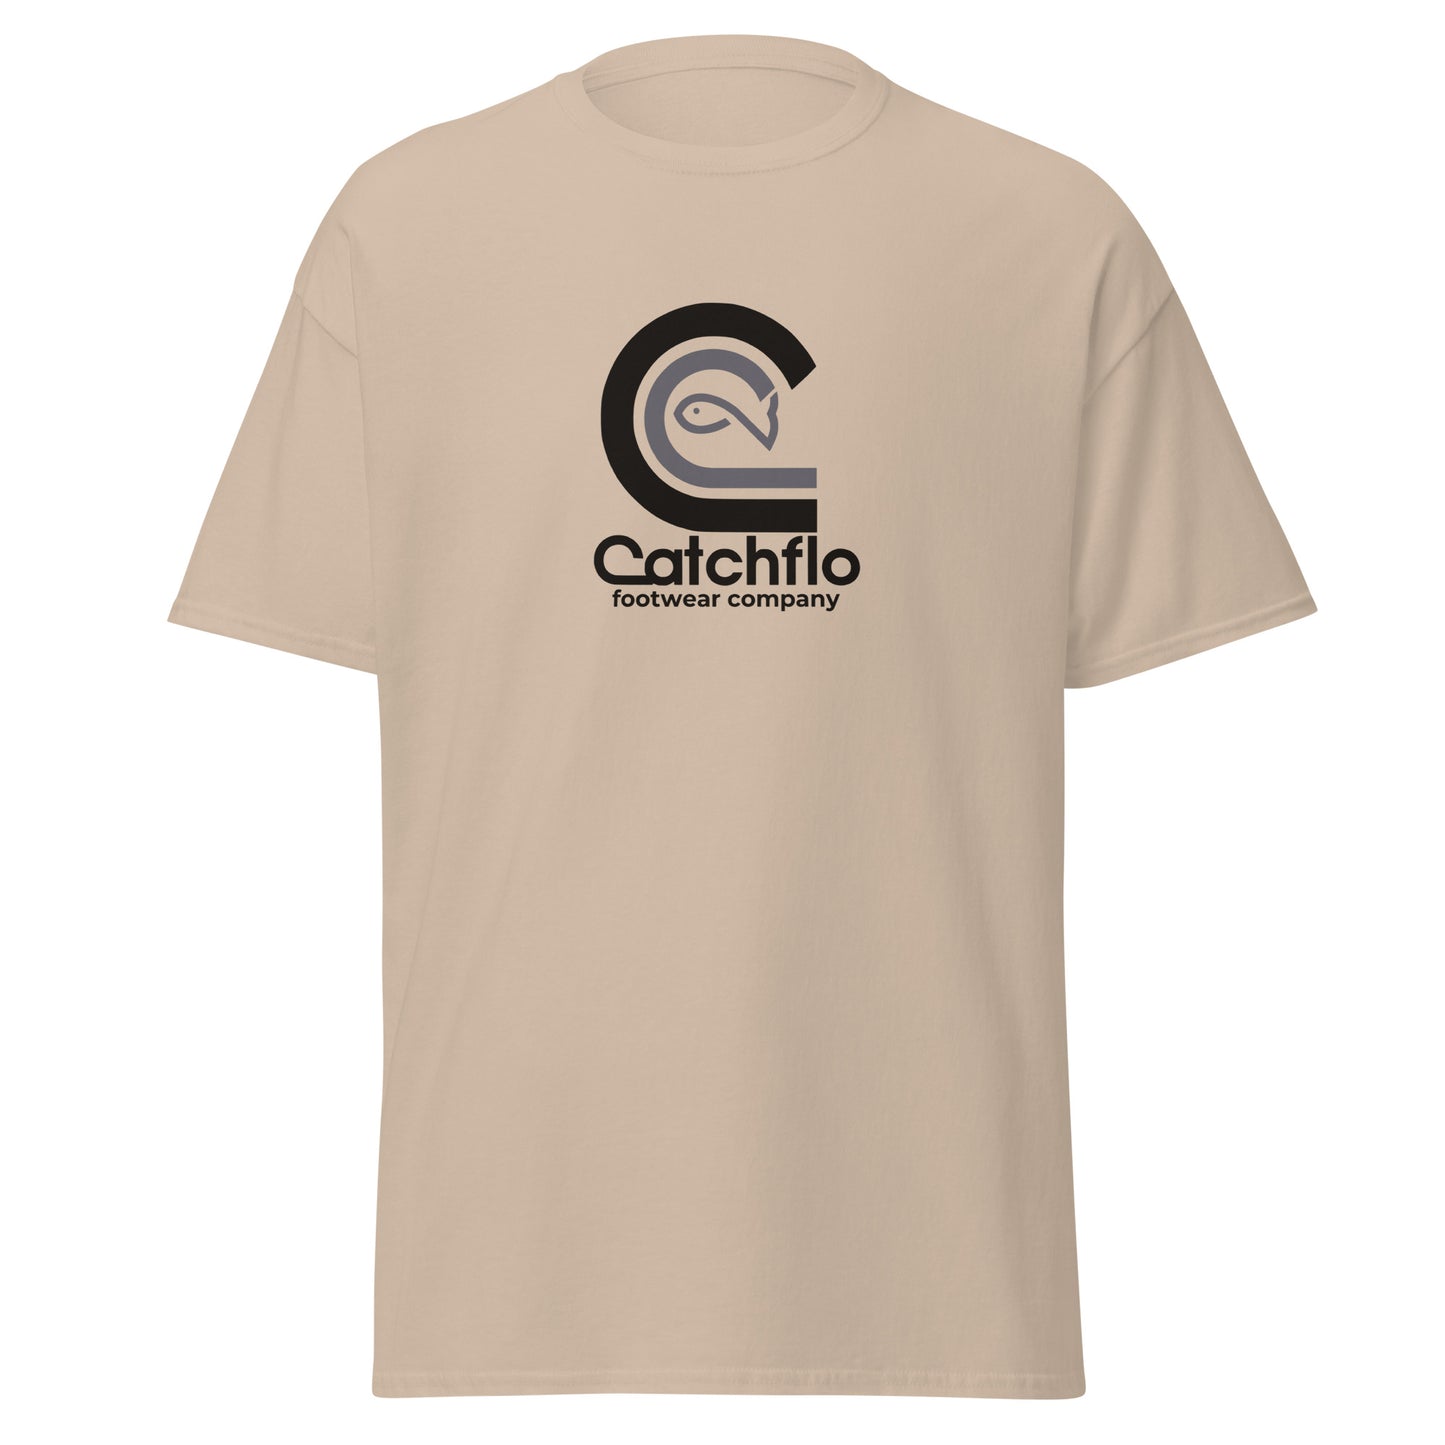 Catchflo Footwear Company Unisex Tee Shirt (20 color choices)